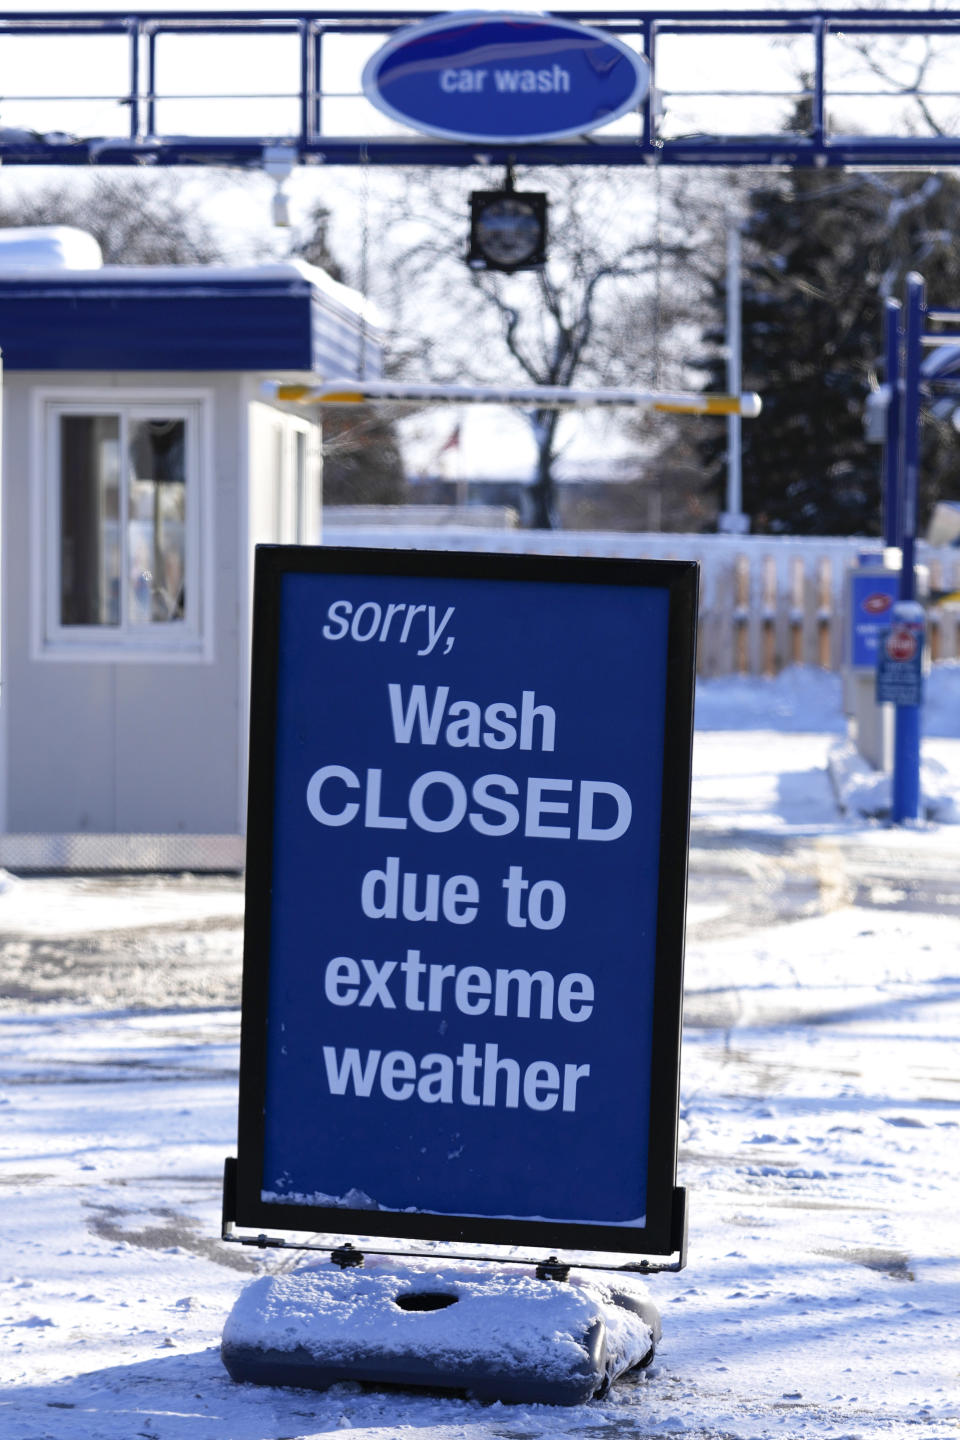 An information sign is displayed at a car wash center in Palatine, Ill., Sunday, Jan. 14, 2024. Wind chill warning is in effect as dangerous cold conditions continue in the Chicago area. (AP Photo/Nam Y. Huh)